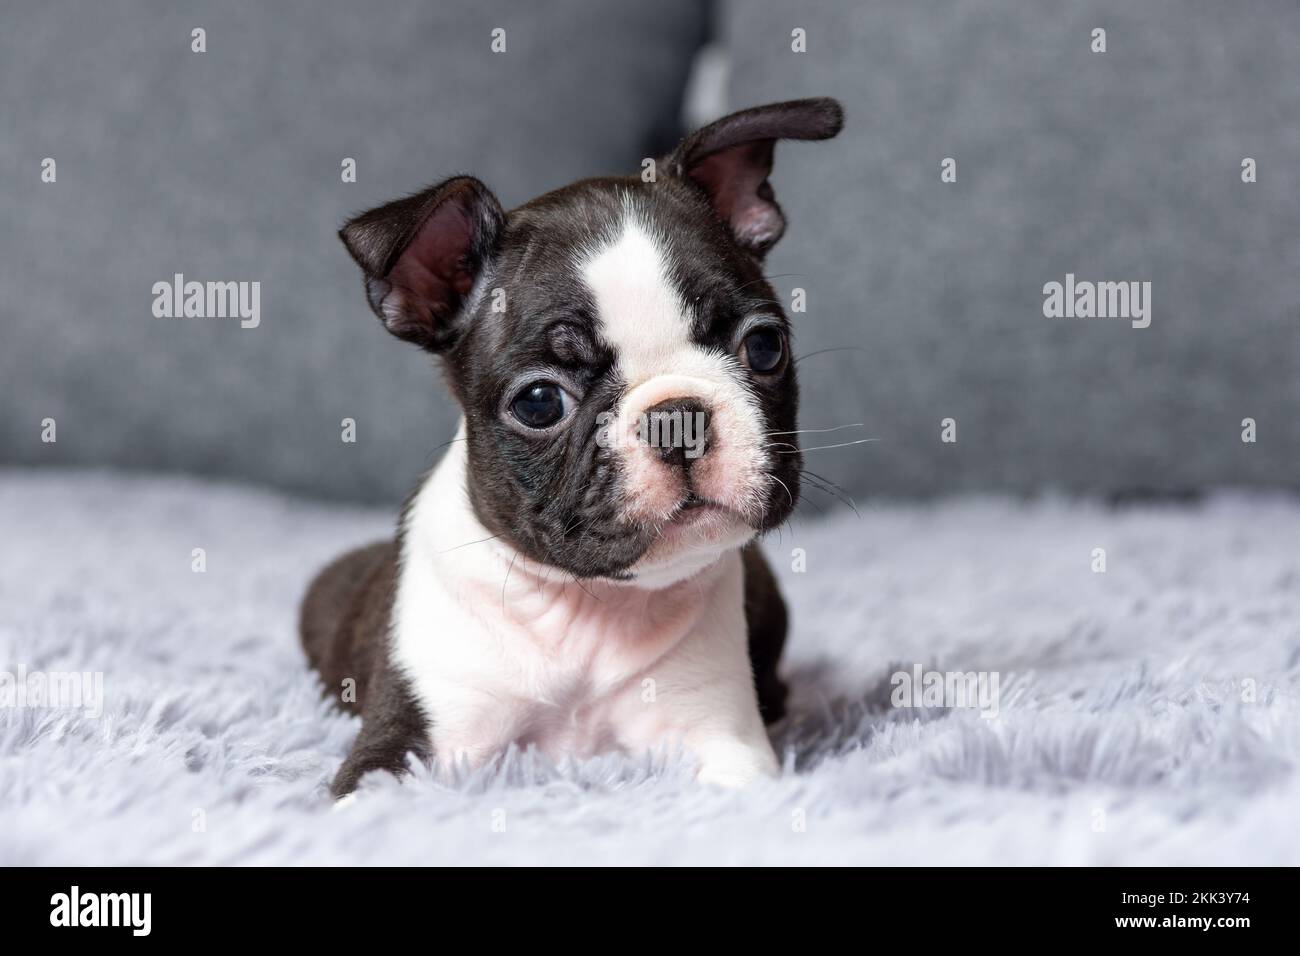 Portrait of a cute little two-month-old Boston Terrier puppy lying on the bed Stock Photo